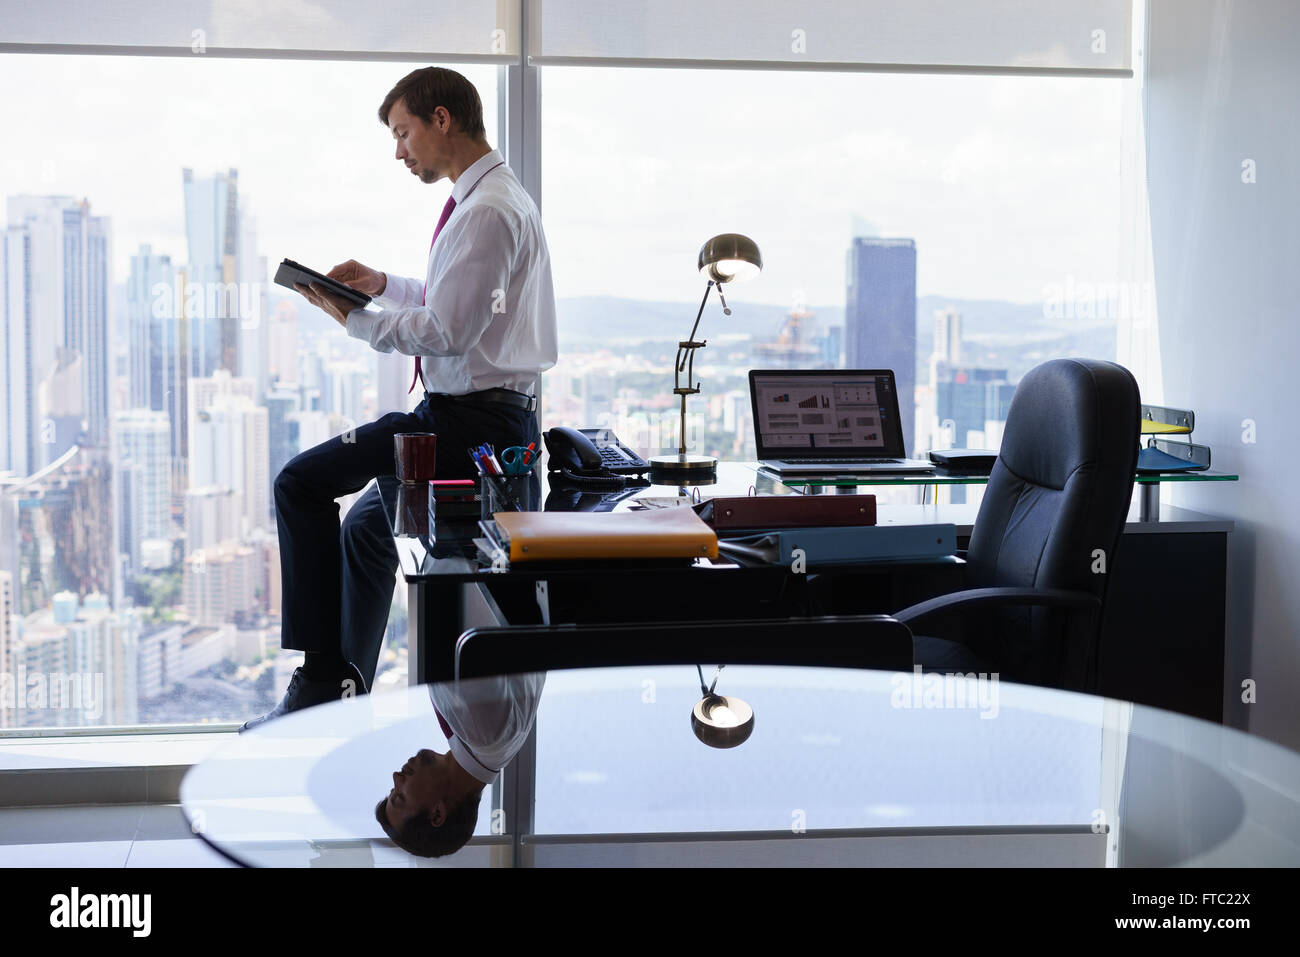 Adult businessman sitting on desk in modern office and reading news on tablet pc. The man works in a skyscraper with a view of t Stock Photo